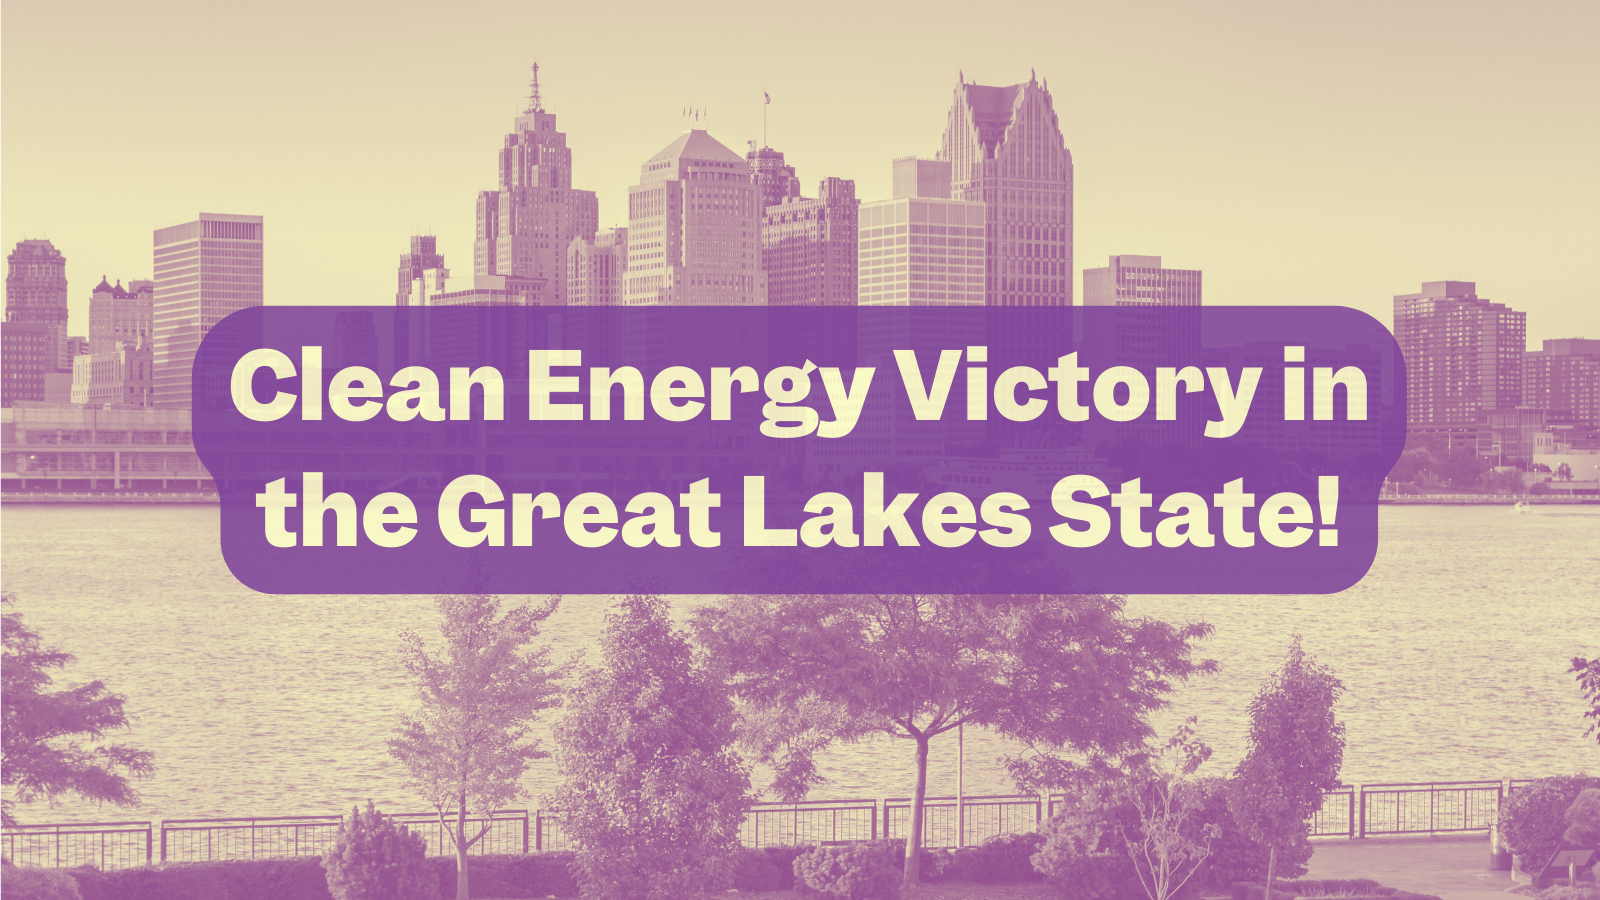 Clean Energy Advocates Negotiate Banner Agreement with DTE Energy